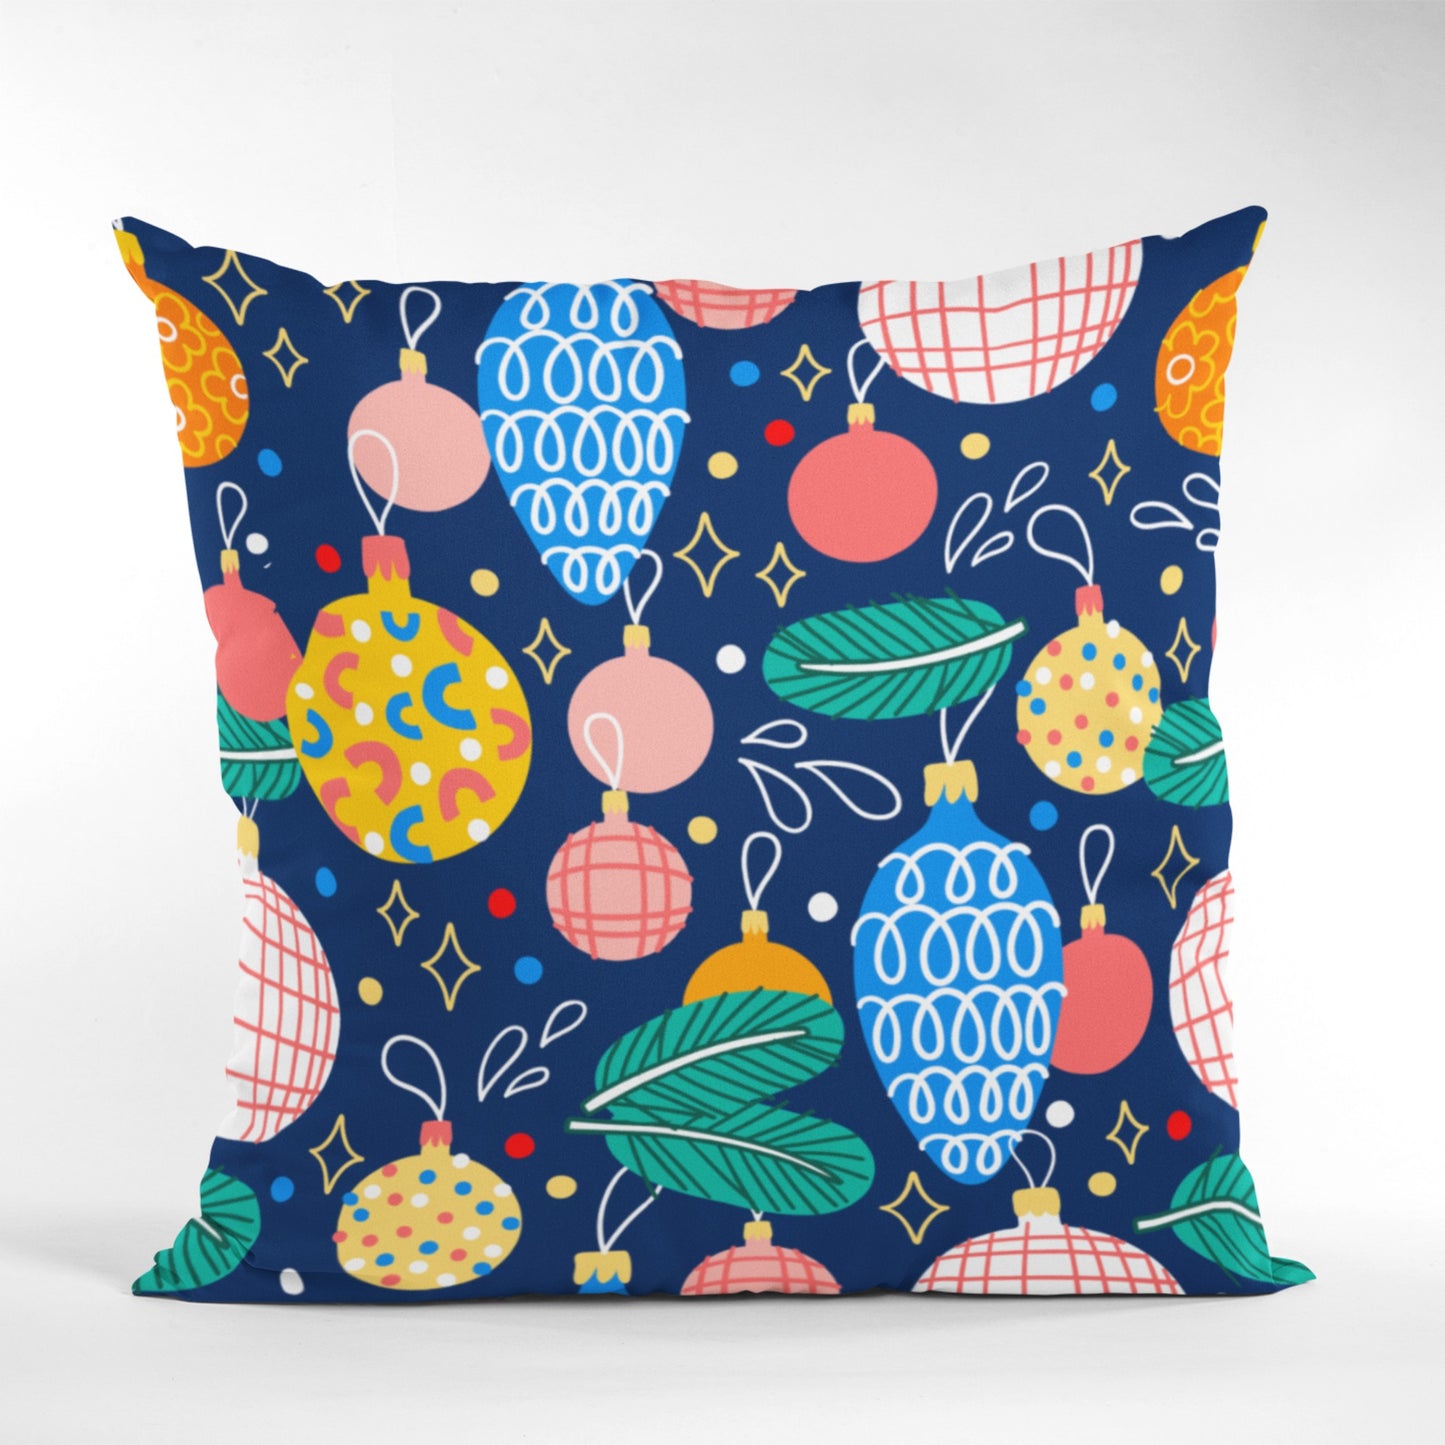 Cozy Pillow with Whimsical Christmas Lights Design